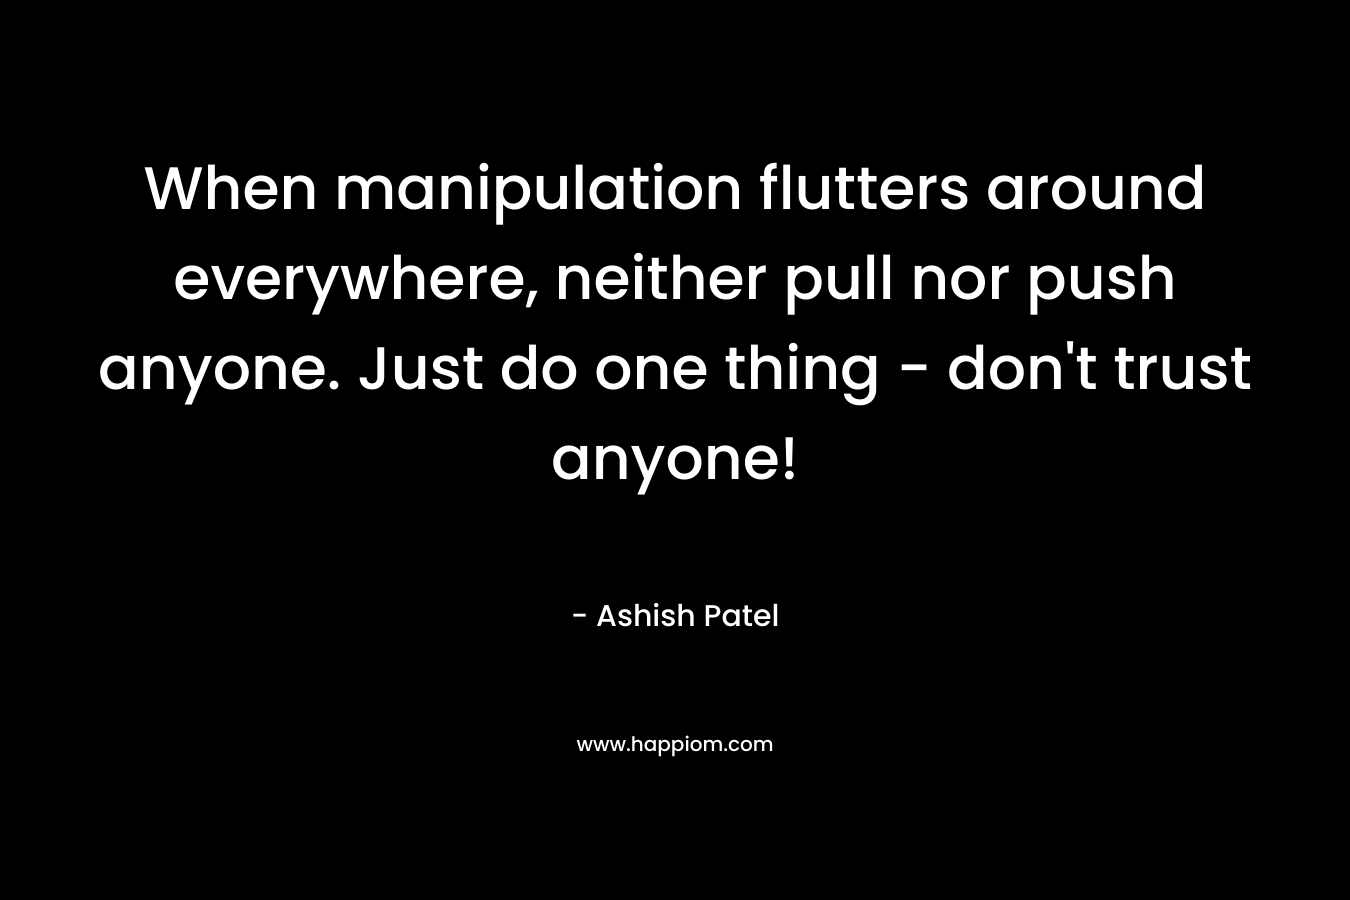 When manipulation flutters around everywhere, neither pull nor push anyone. Just do one thing - don't trust anyone!